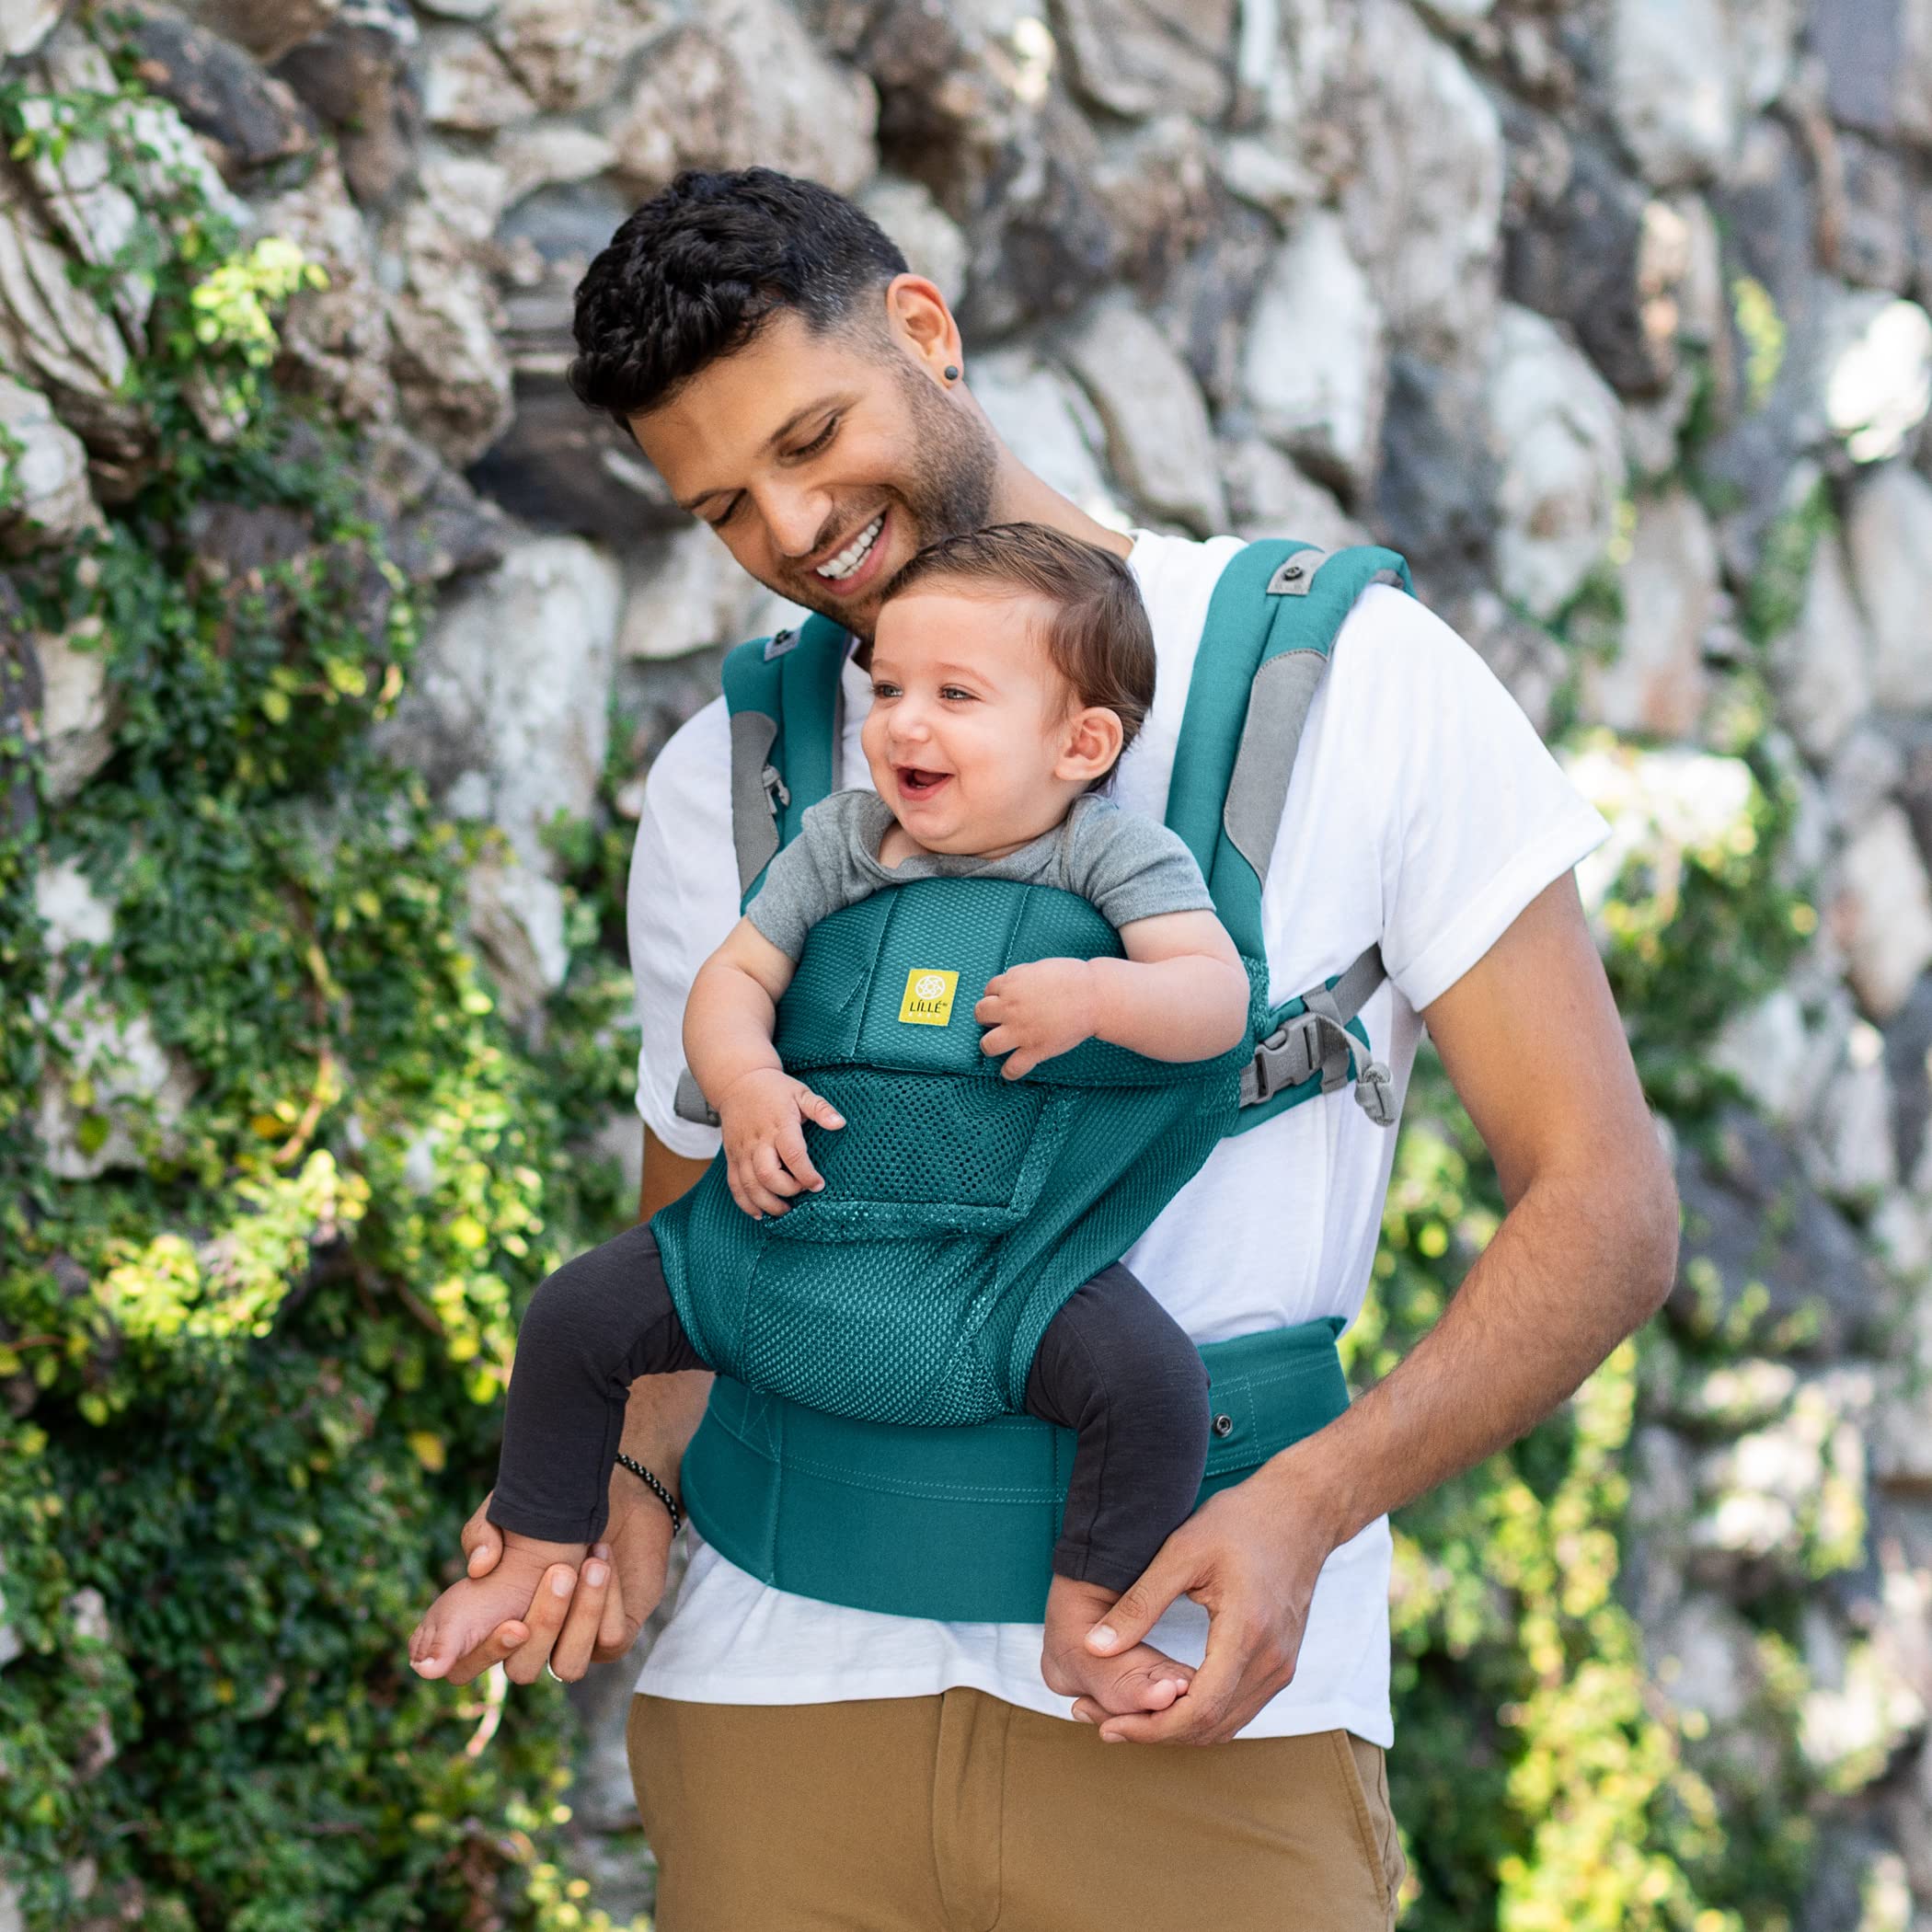 LÍLLÉbaby Complete Airflow Ergonomic 6-in-1 Baby Carrier Newborn to Toddler - with Lumbar Support and Dragonfly Wrap Ergonomic Baby Wrap Carrier Bundle for Newborns & Infants